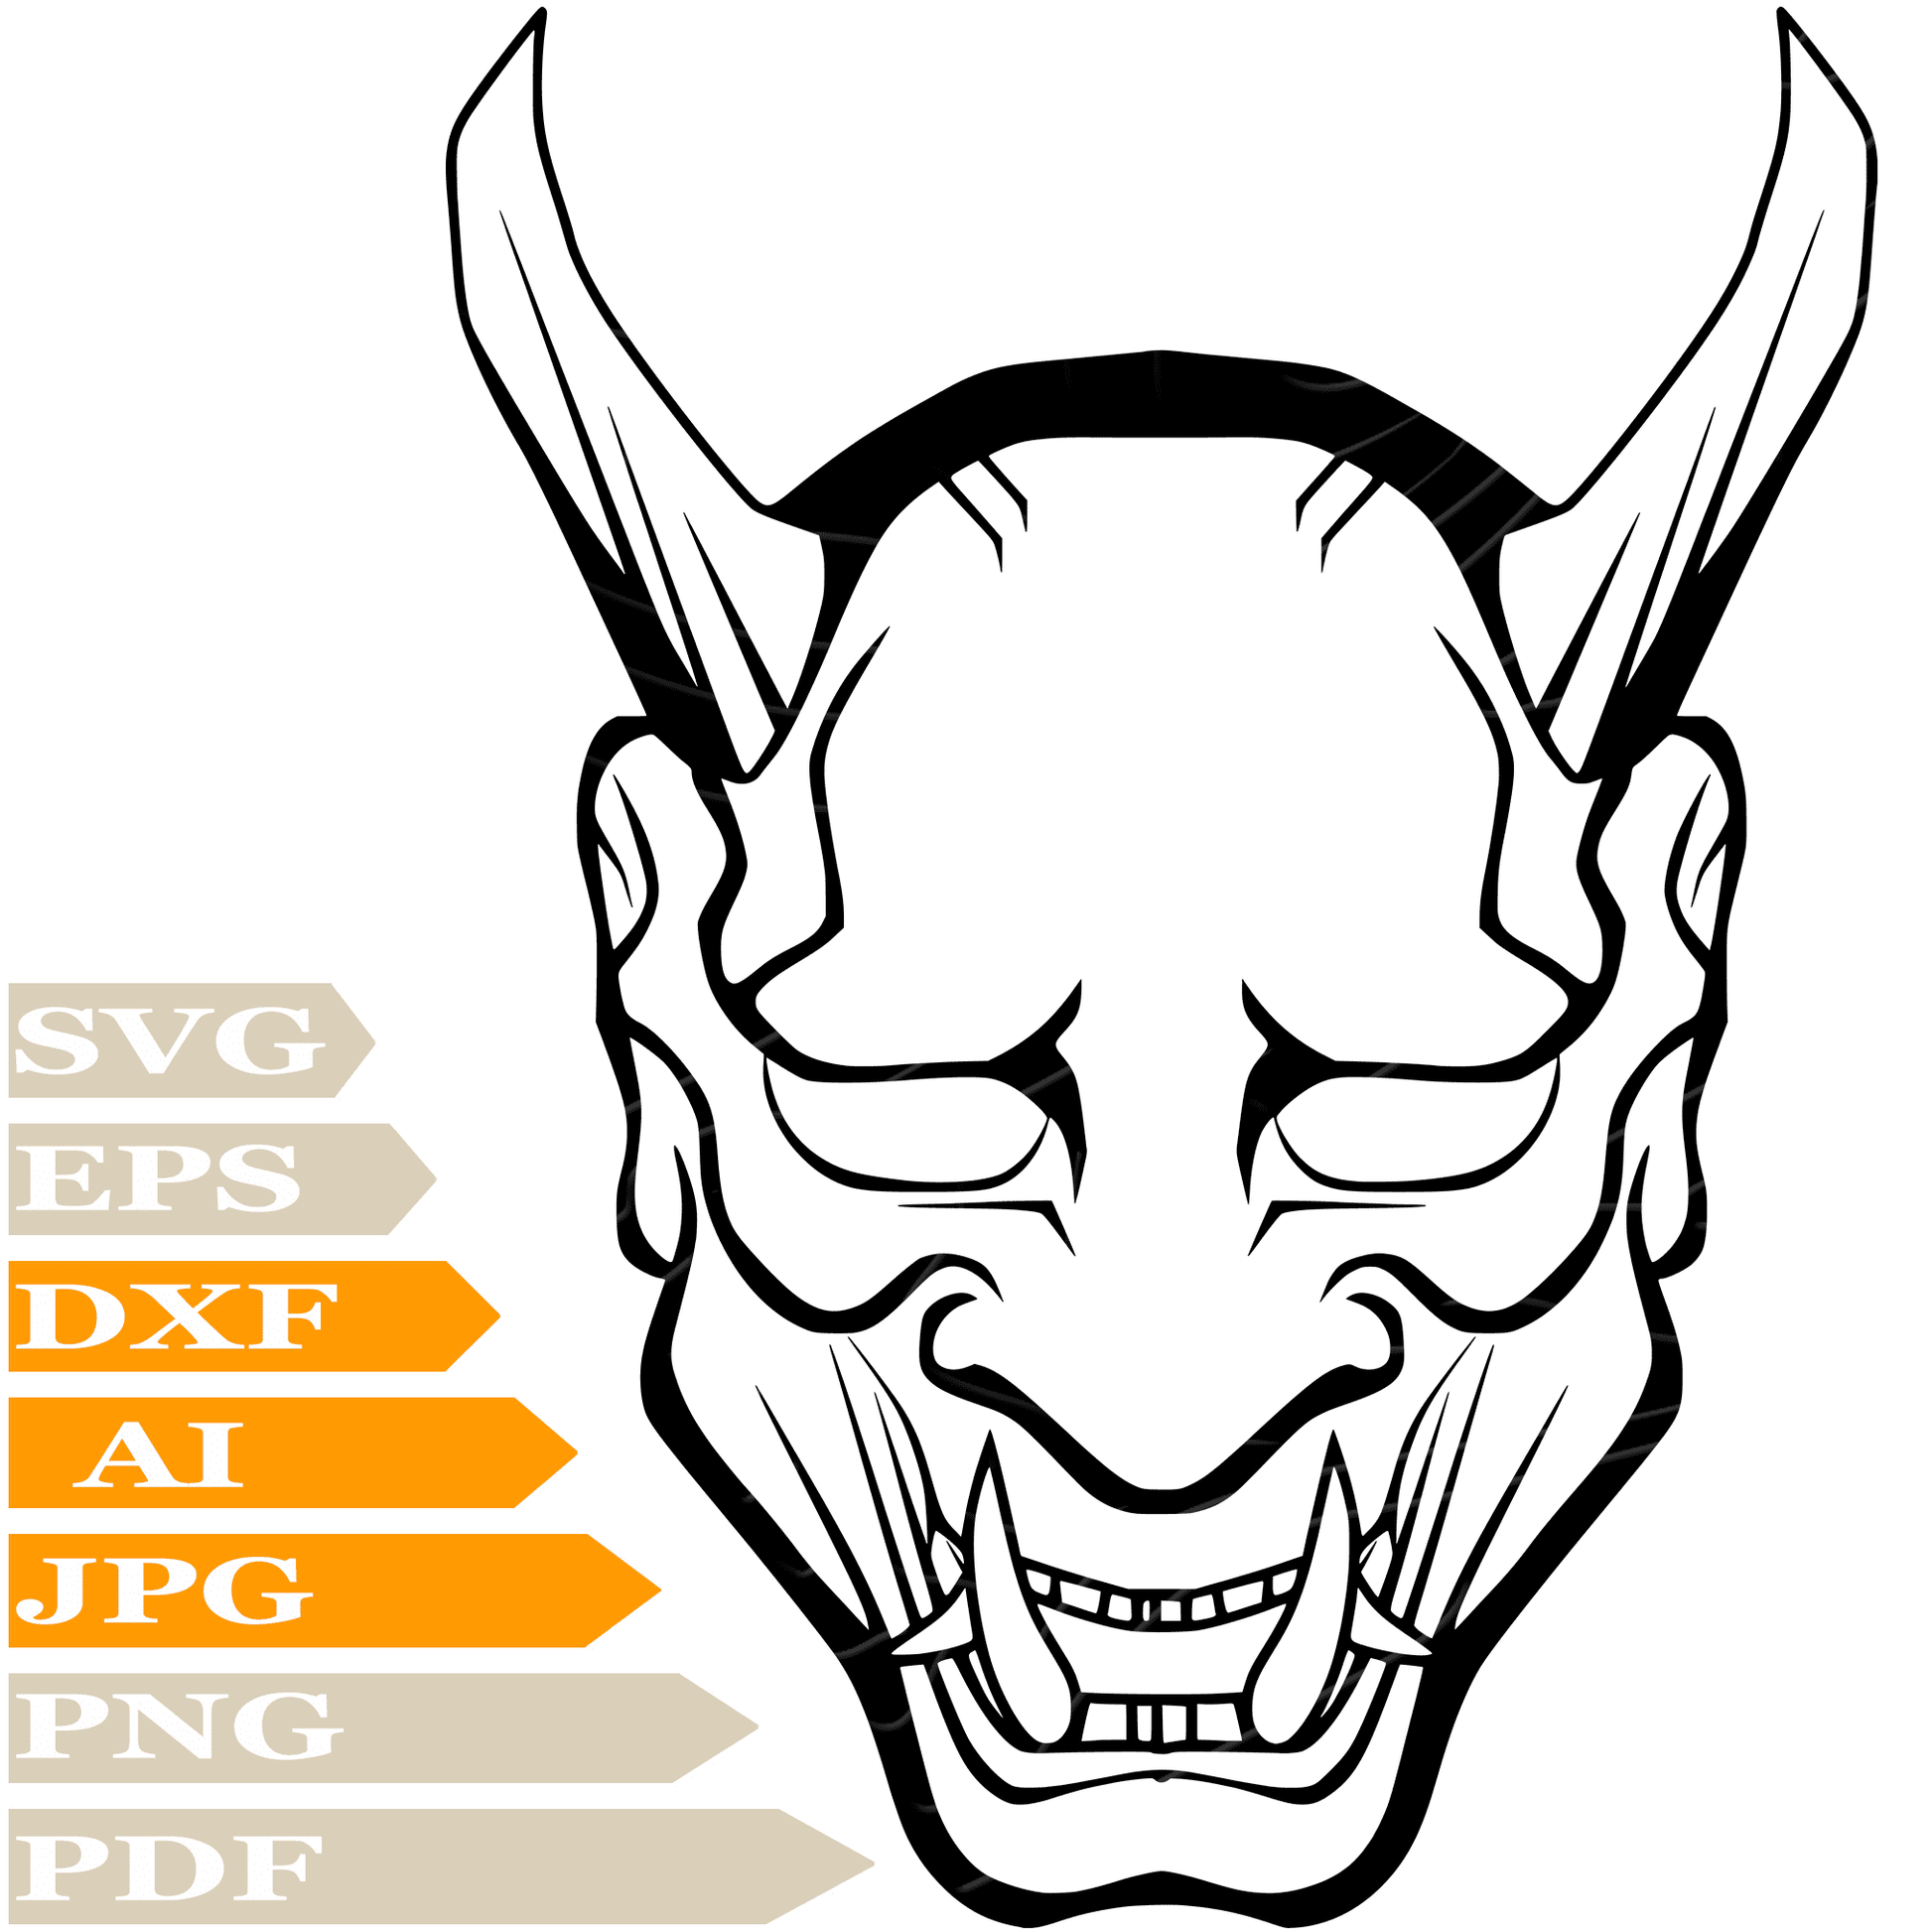 Monster SVG File-Angry Devil Personalized SVG-Monster Horns Drawing SVG-Monster Vector ClipArt's-SVG Cut Files-Illustration-PNG-Decal-Circuit-Digital Files-For Shirts-Silhouette